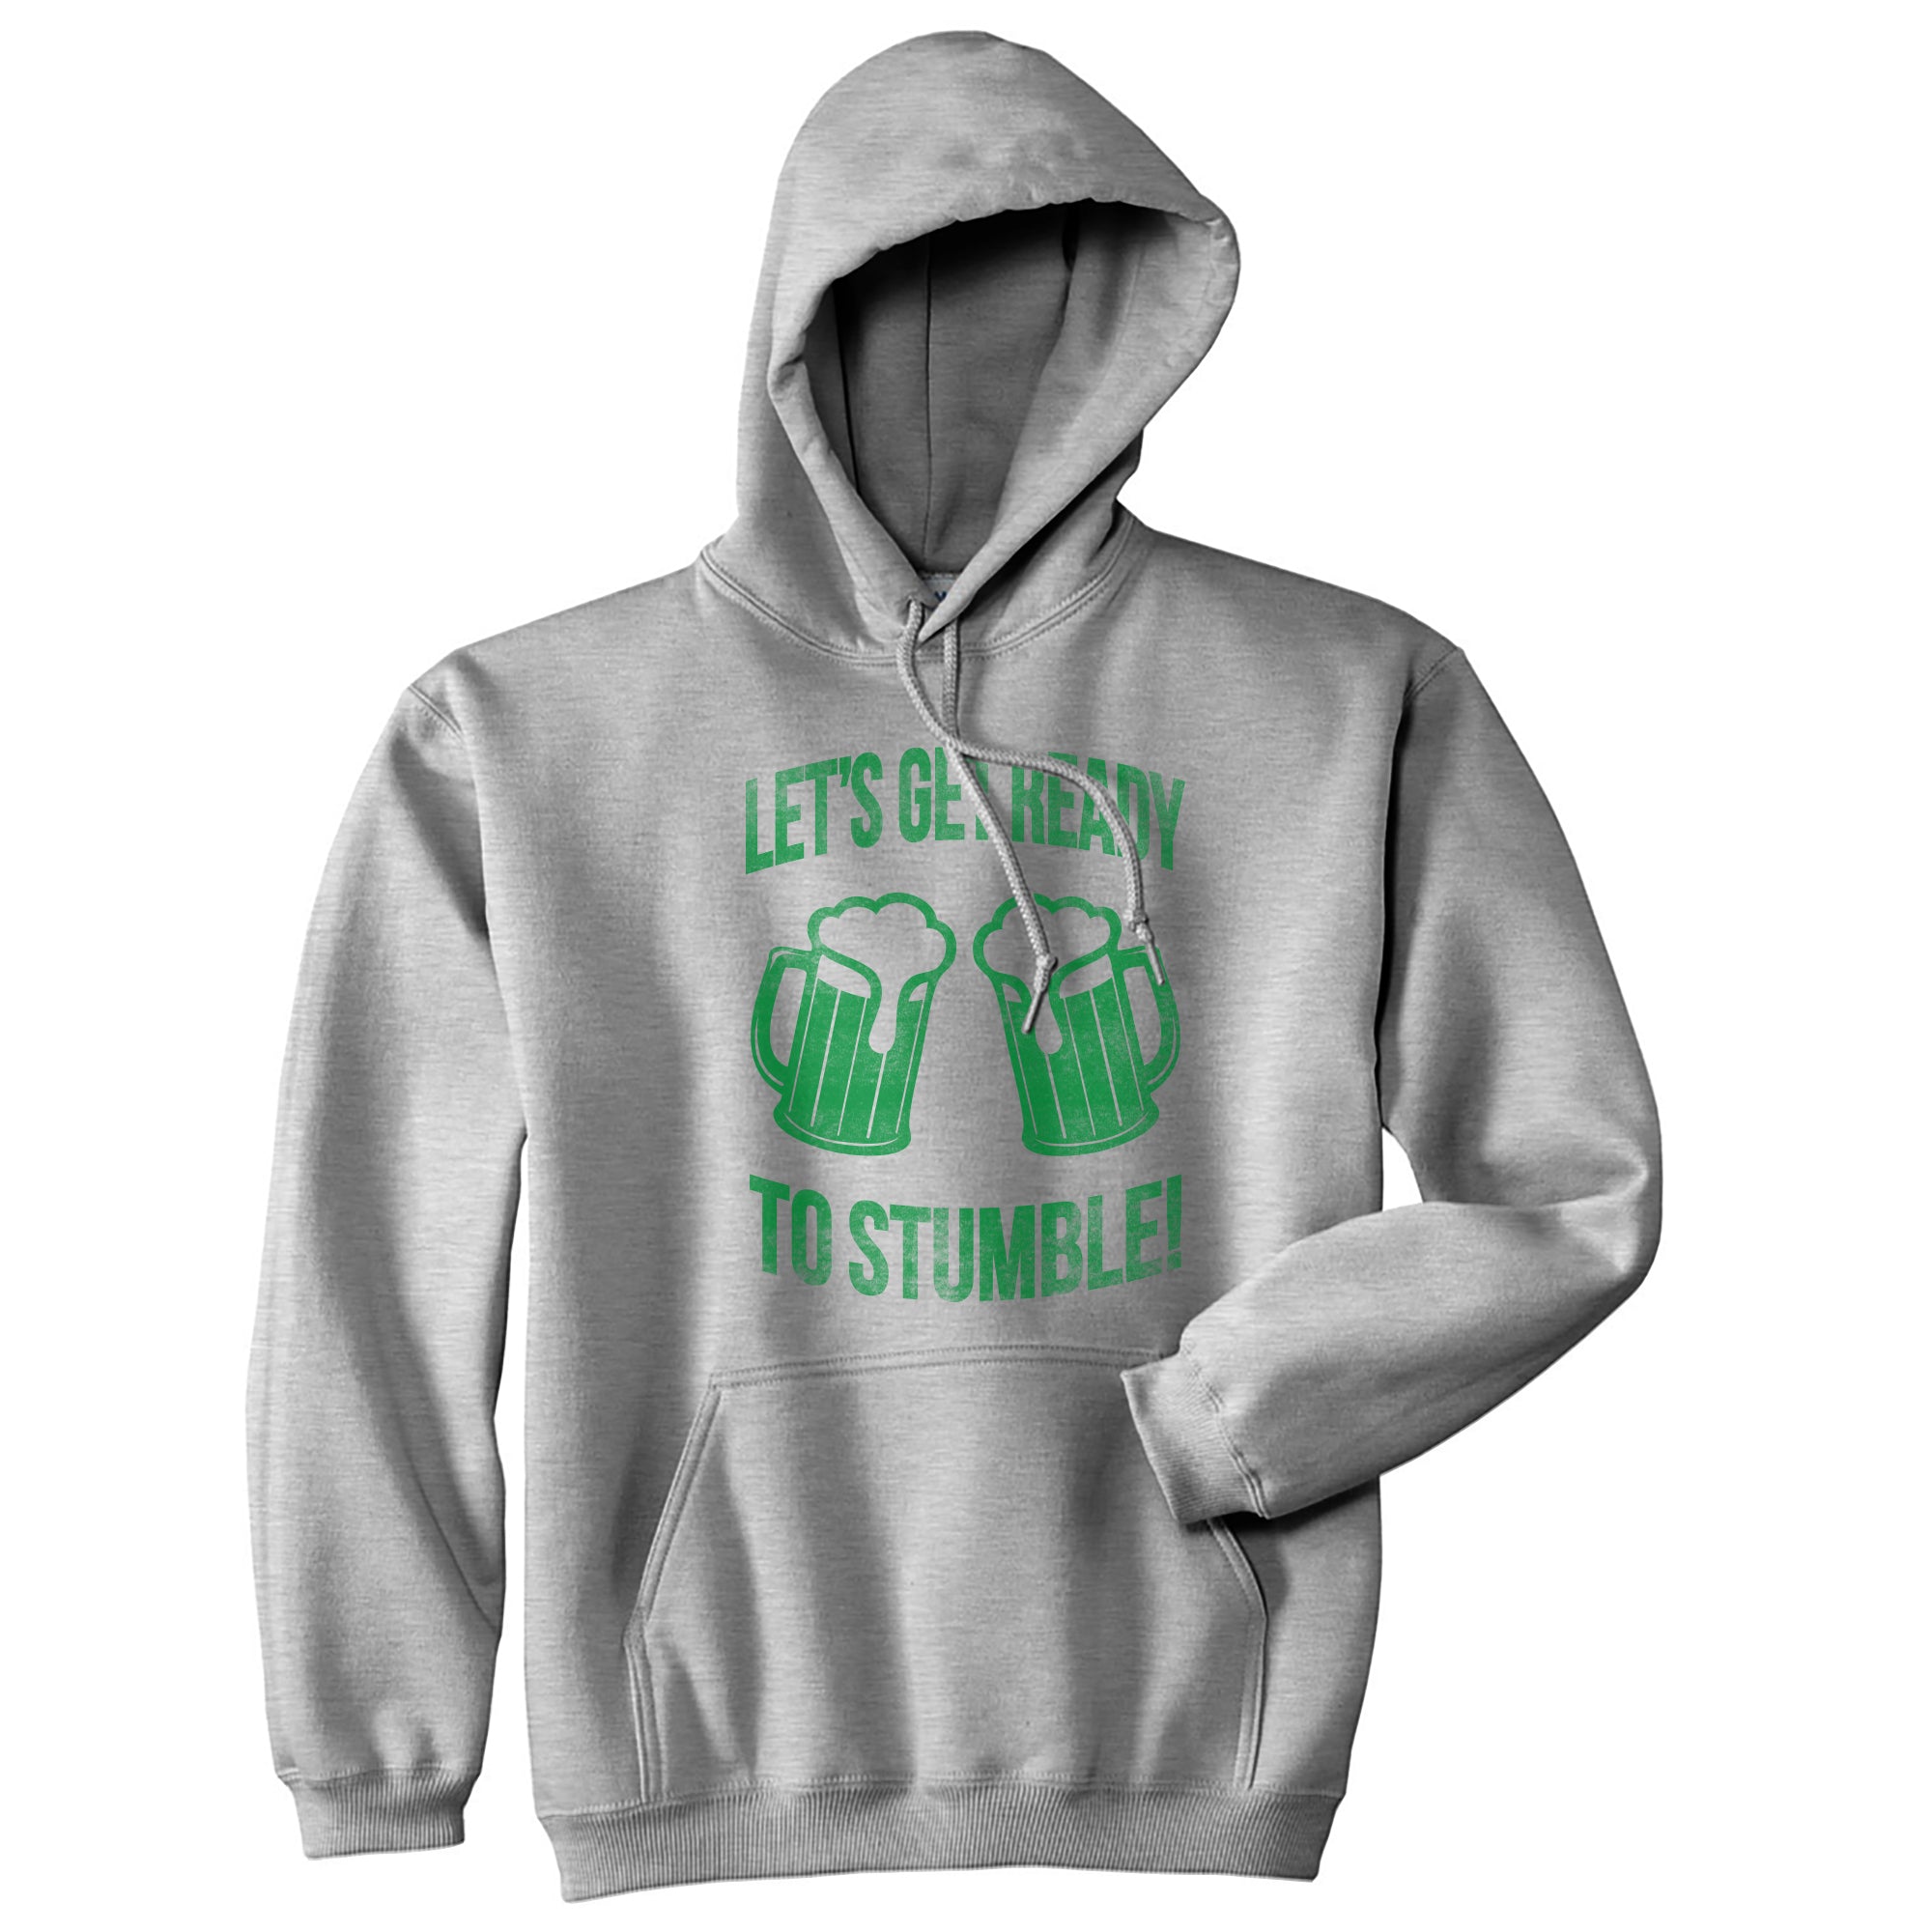 Funny Heather Grey - Ready to Stumble Lets Get Ready To Stumble Hoodie Nerdy Saint Patrick's Day Drinking Tee